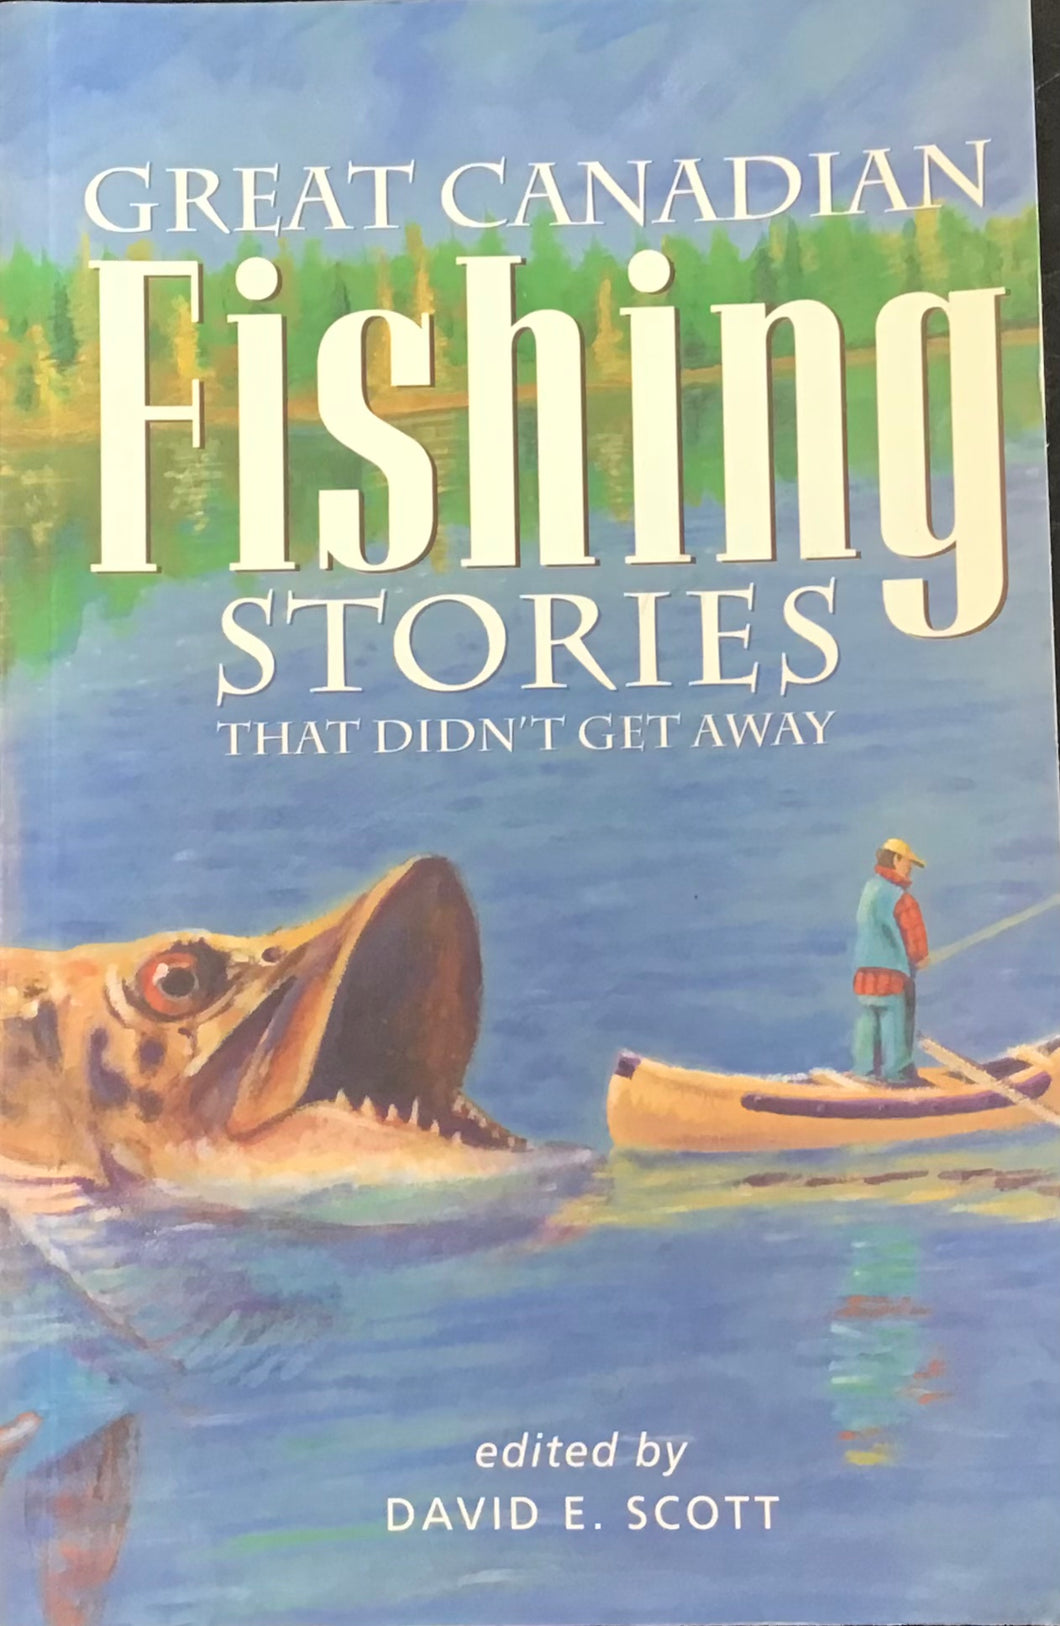 Great Canadian Fishing Stories